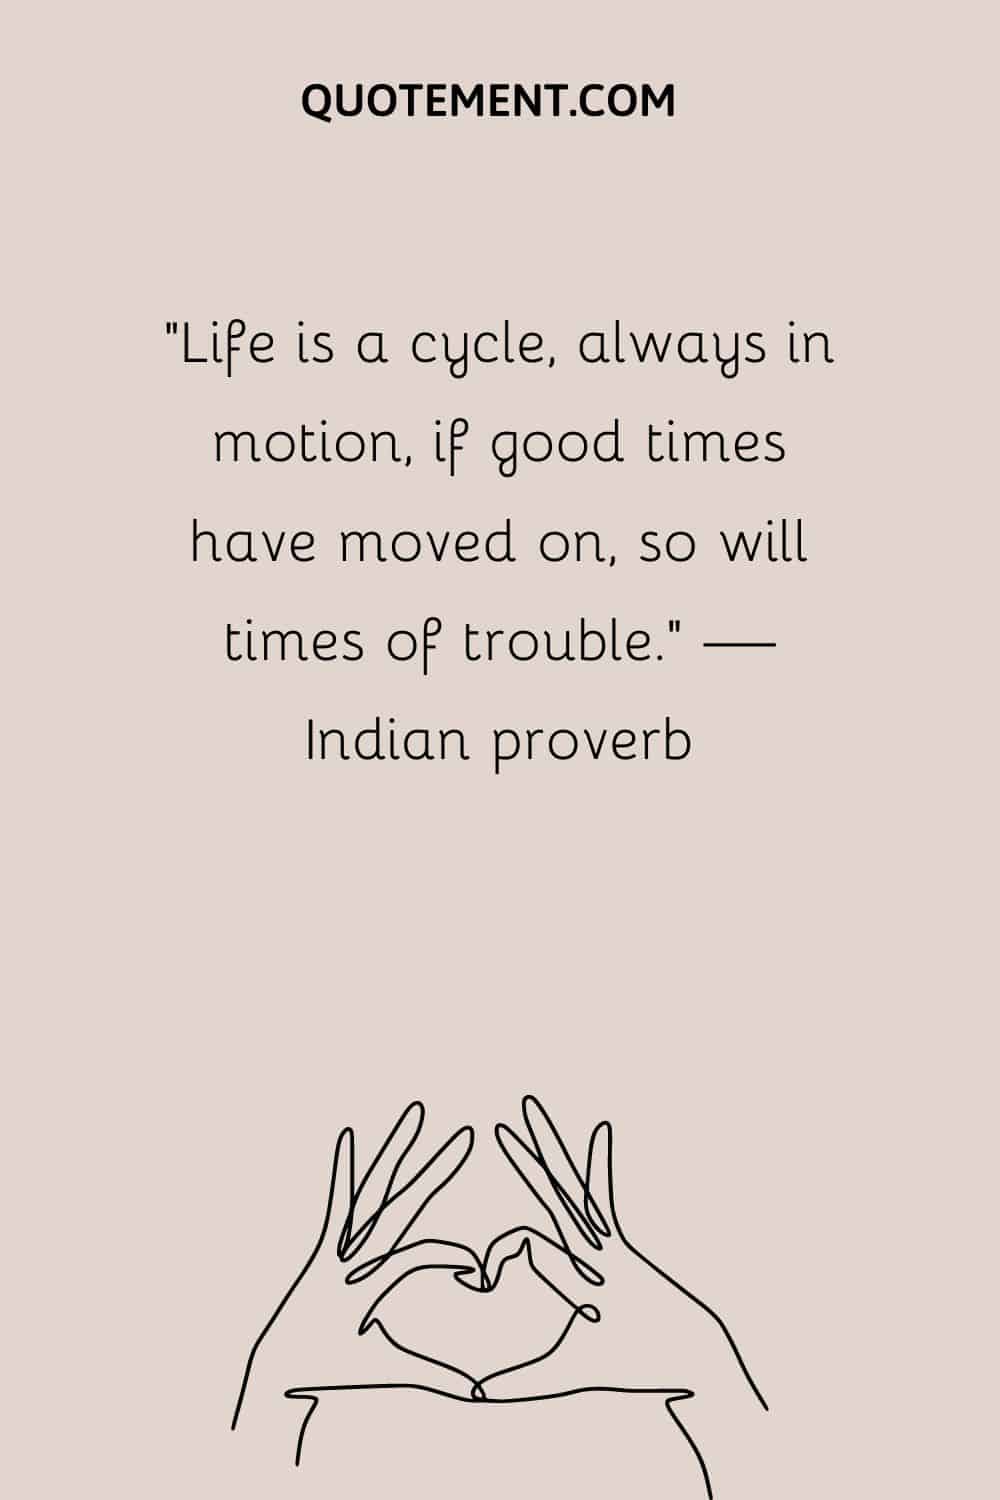 “Life is a cycle, always in motion, if good times have moved on, so will times of trouble.” — Indian proverb